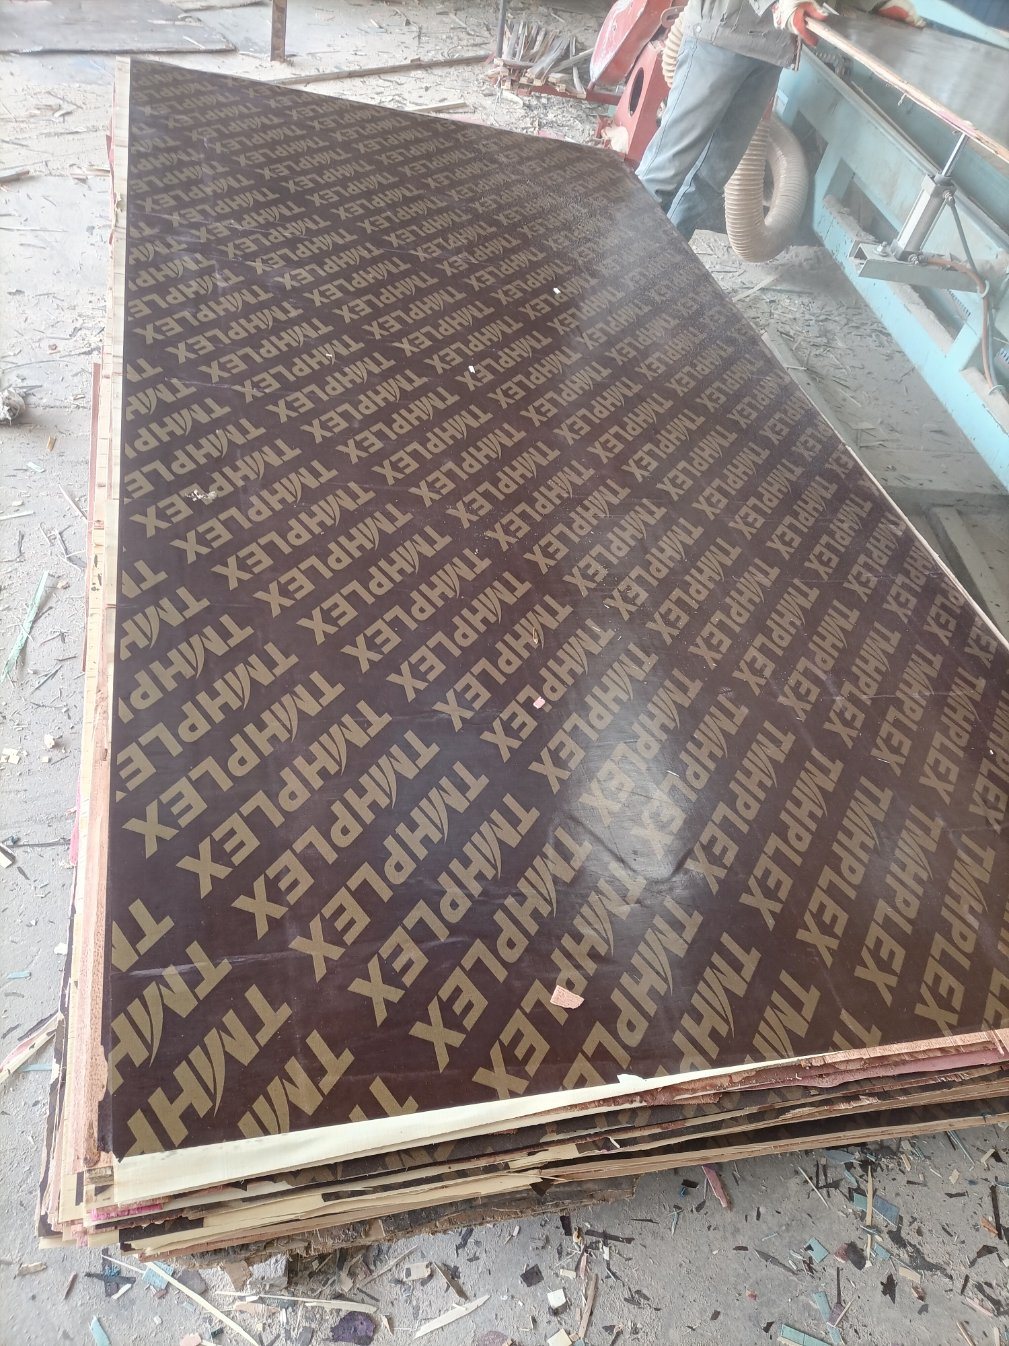 16mm 18mm Mr WBP Red Brown Black Film Faced Construction Plywood Panel for Building Formwork